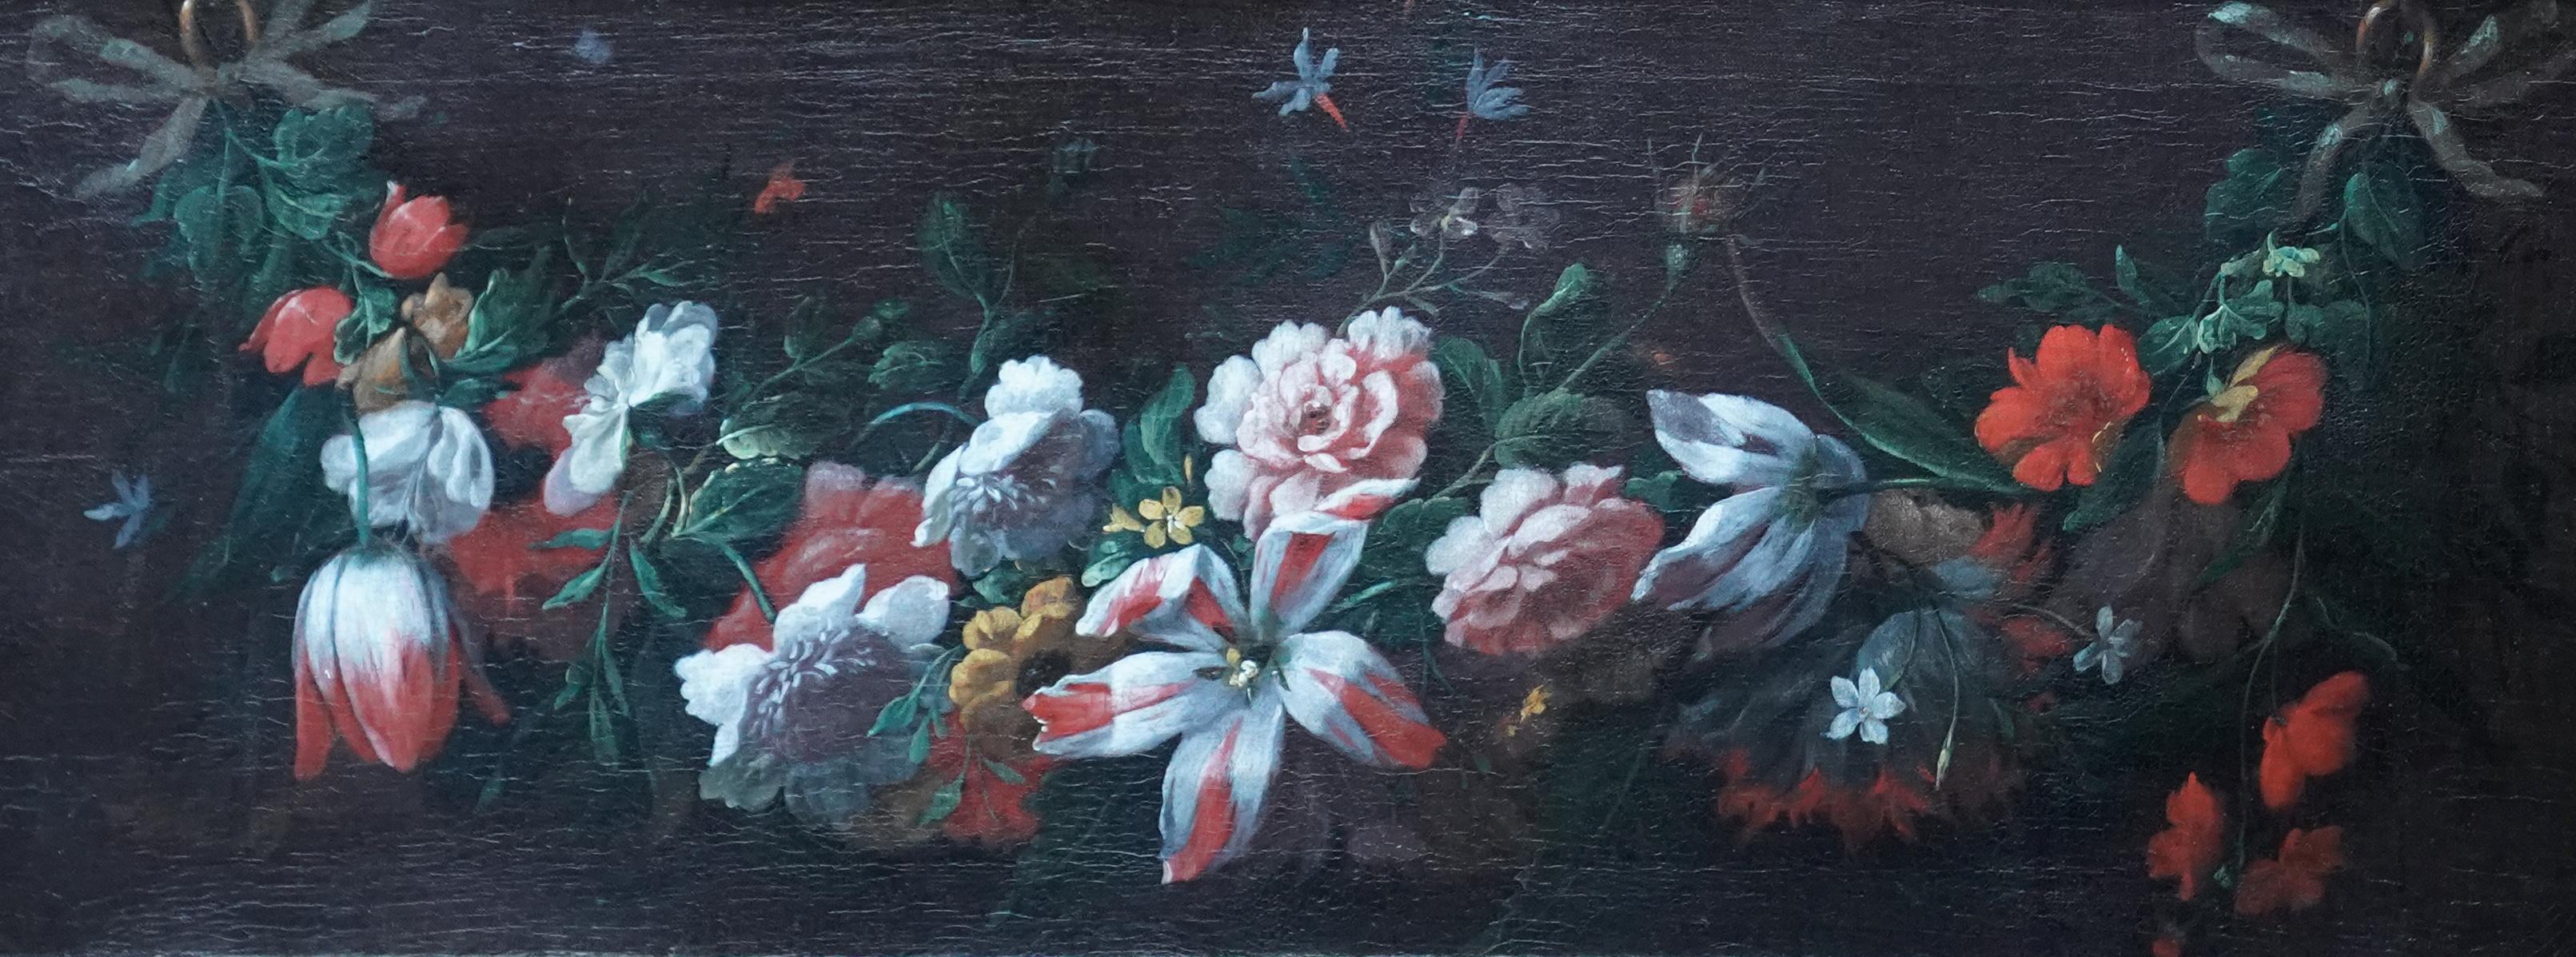 Still Life Garland of Flowers - Flemish 18thC art Old Master floral oil painting For Sale 8